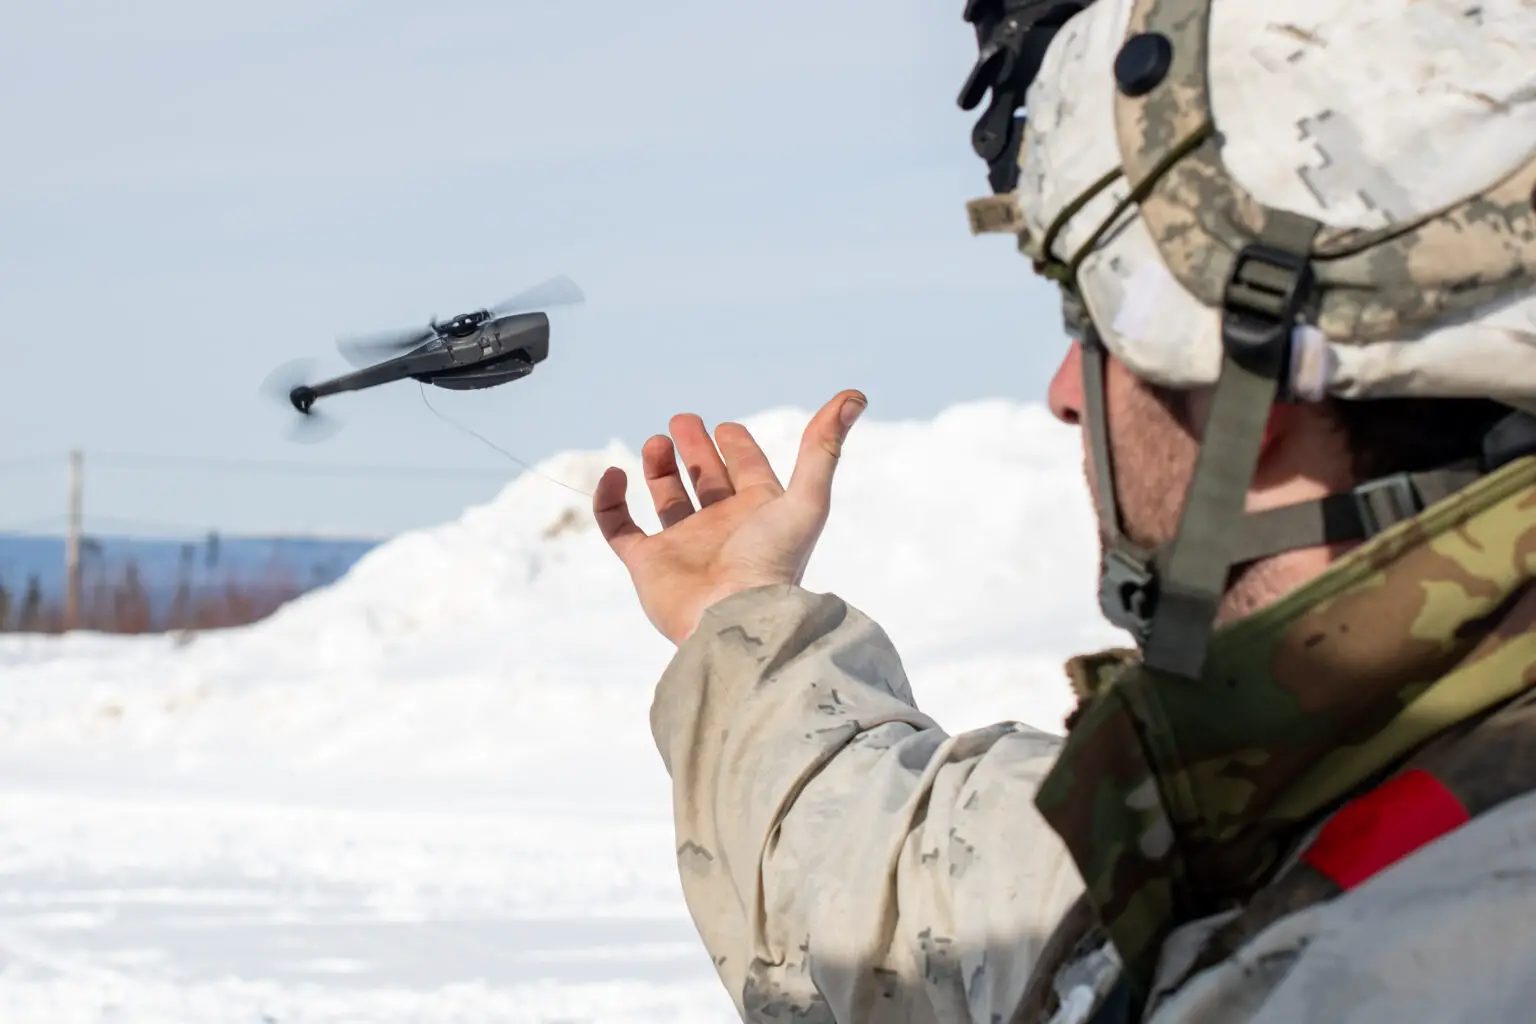 You are currently viewing The US Army has purchased additional nano drones as part of a $93 million agreement.